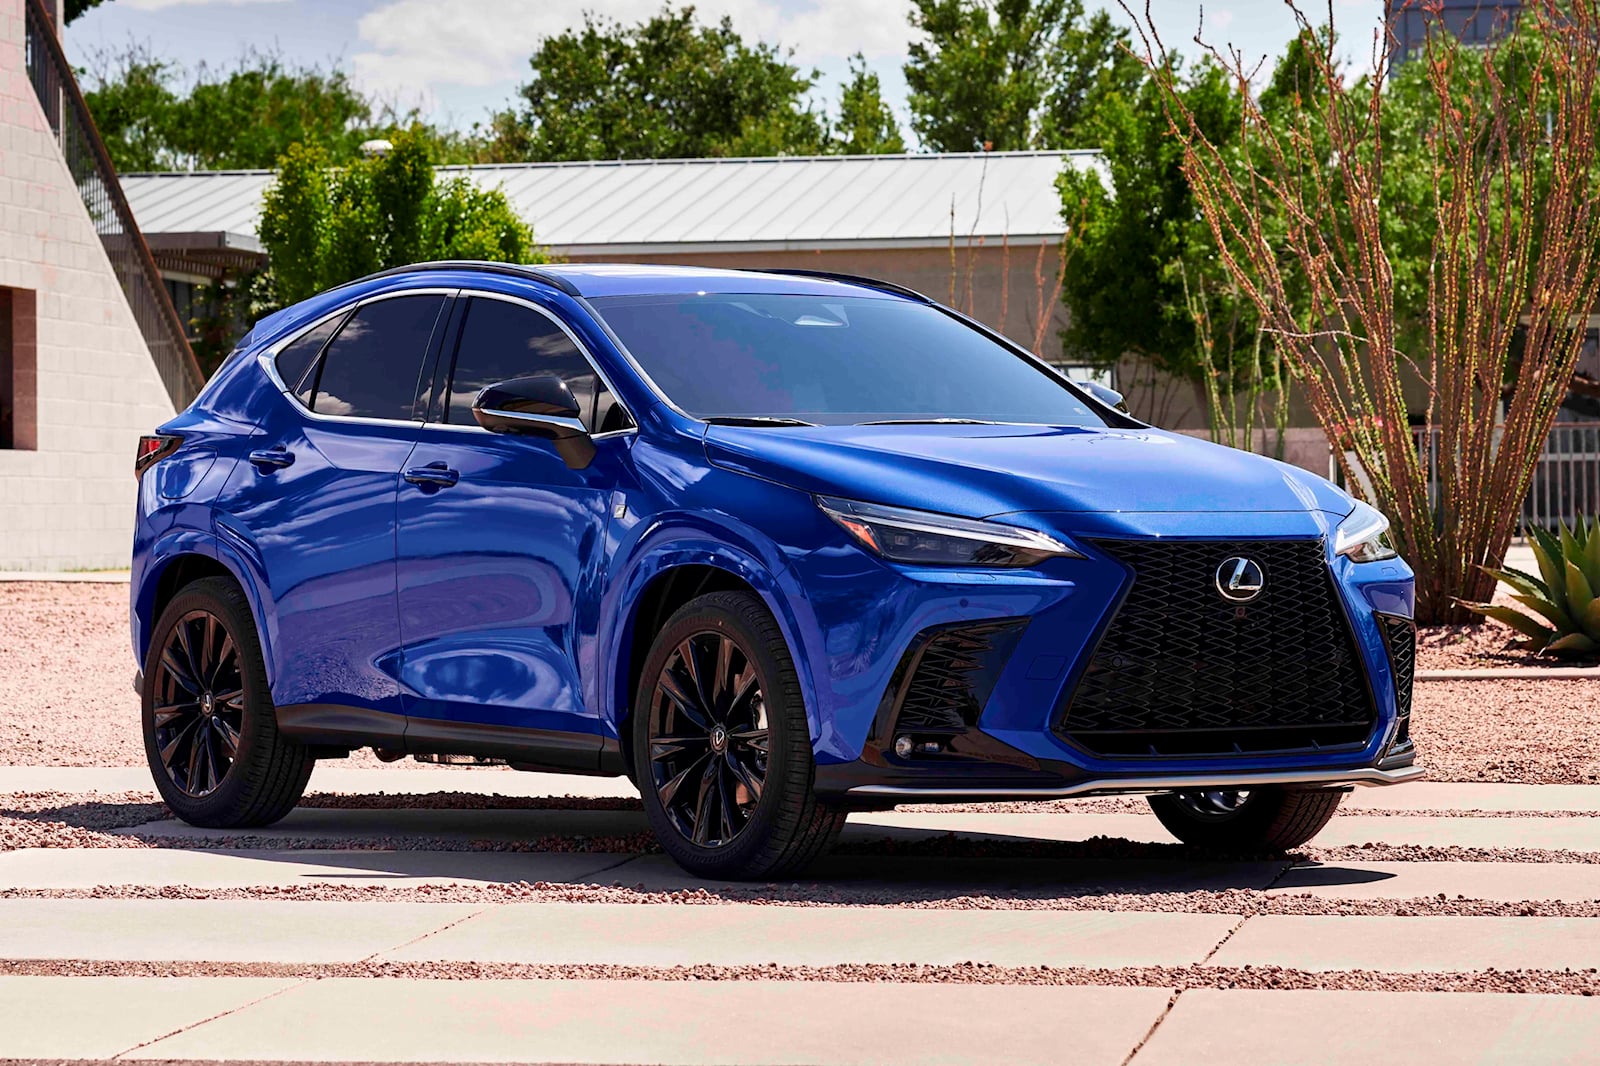 Used Lexus NX Hybrid in Nori Green Pearl For Sale Check Photos, Prices